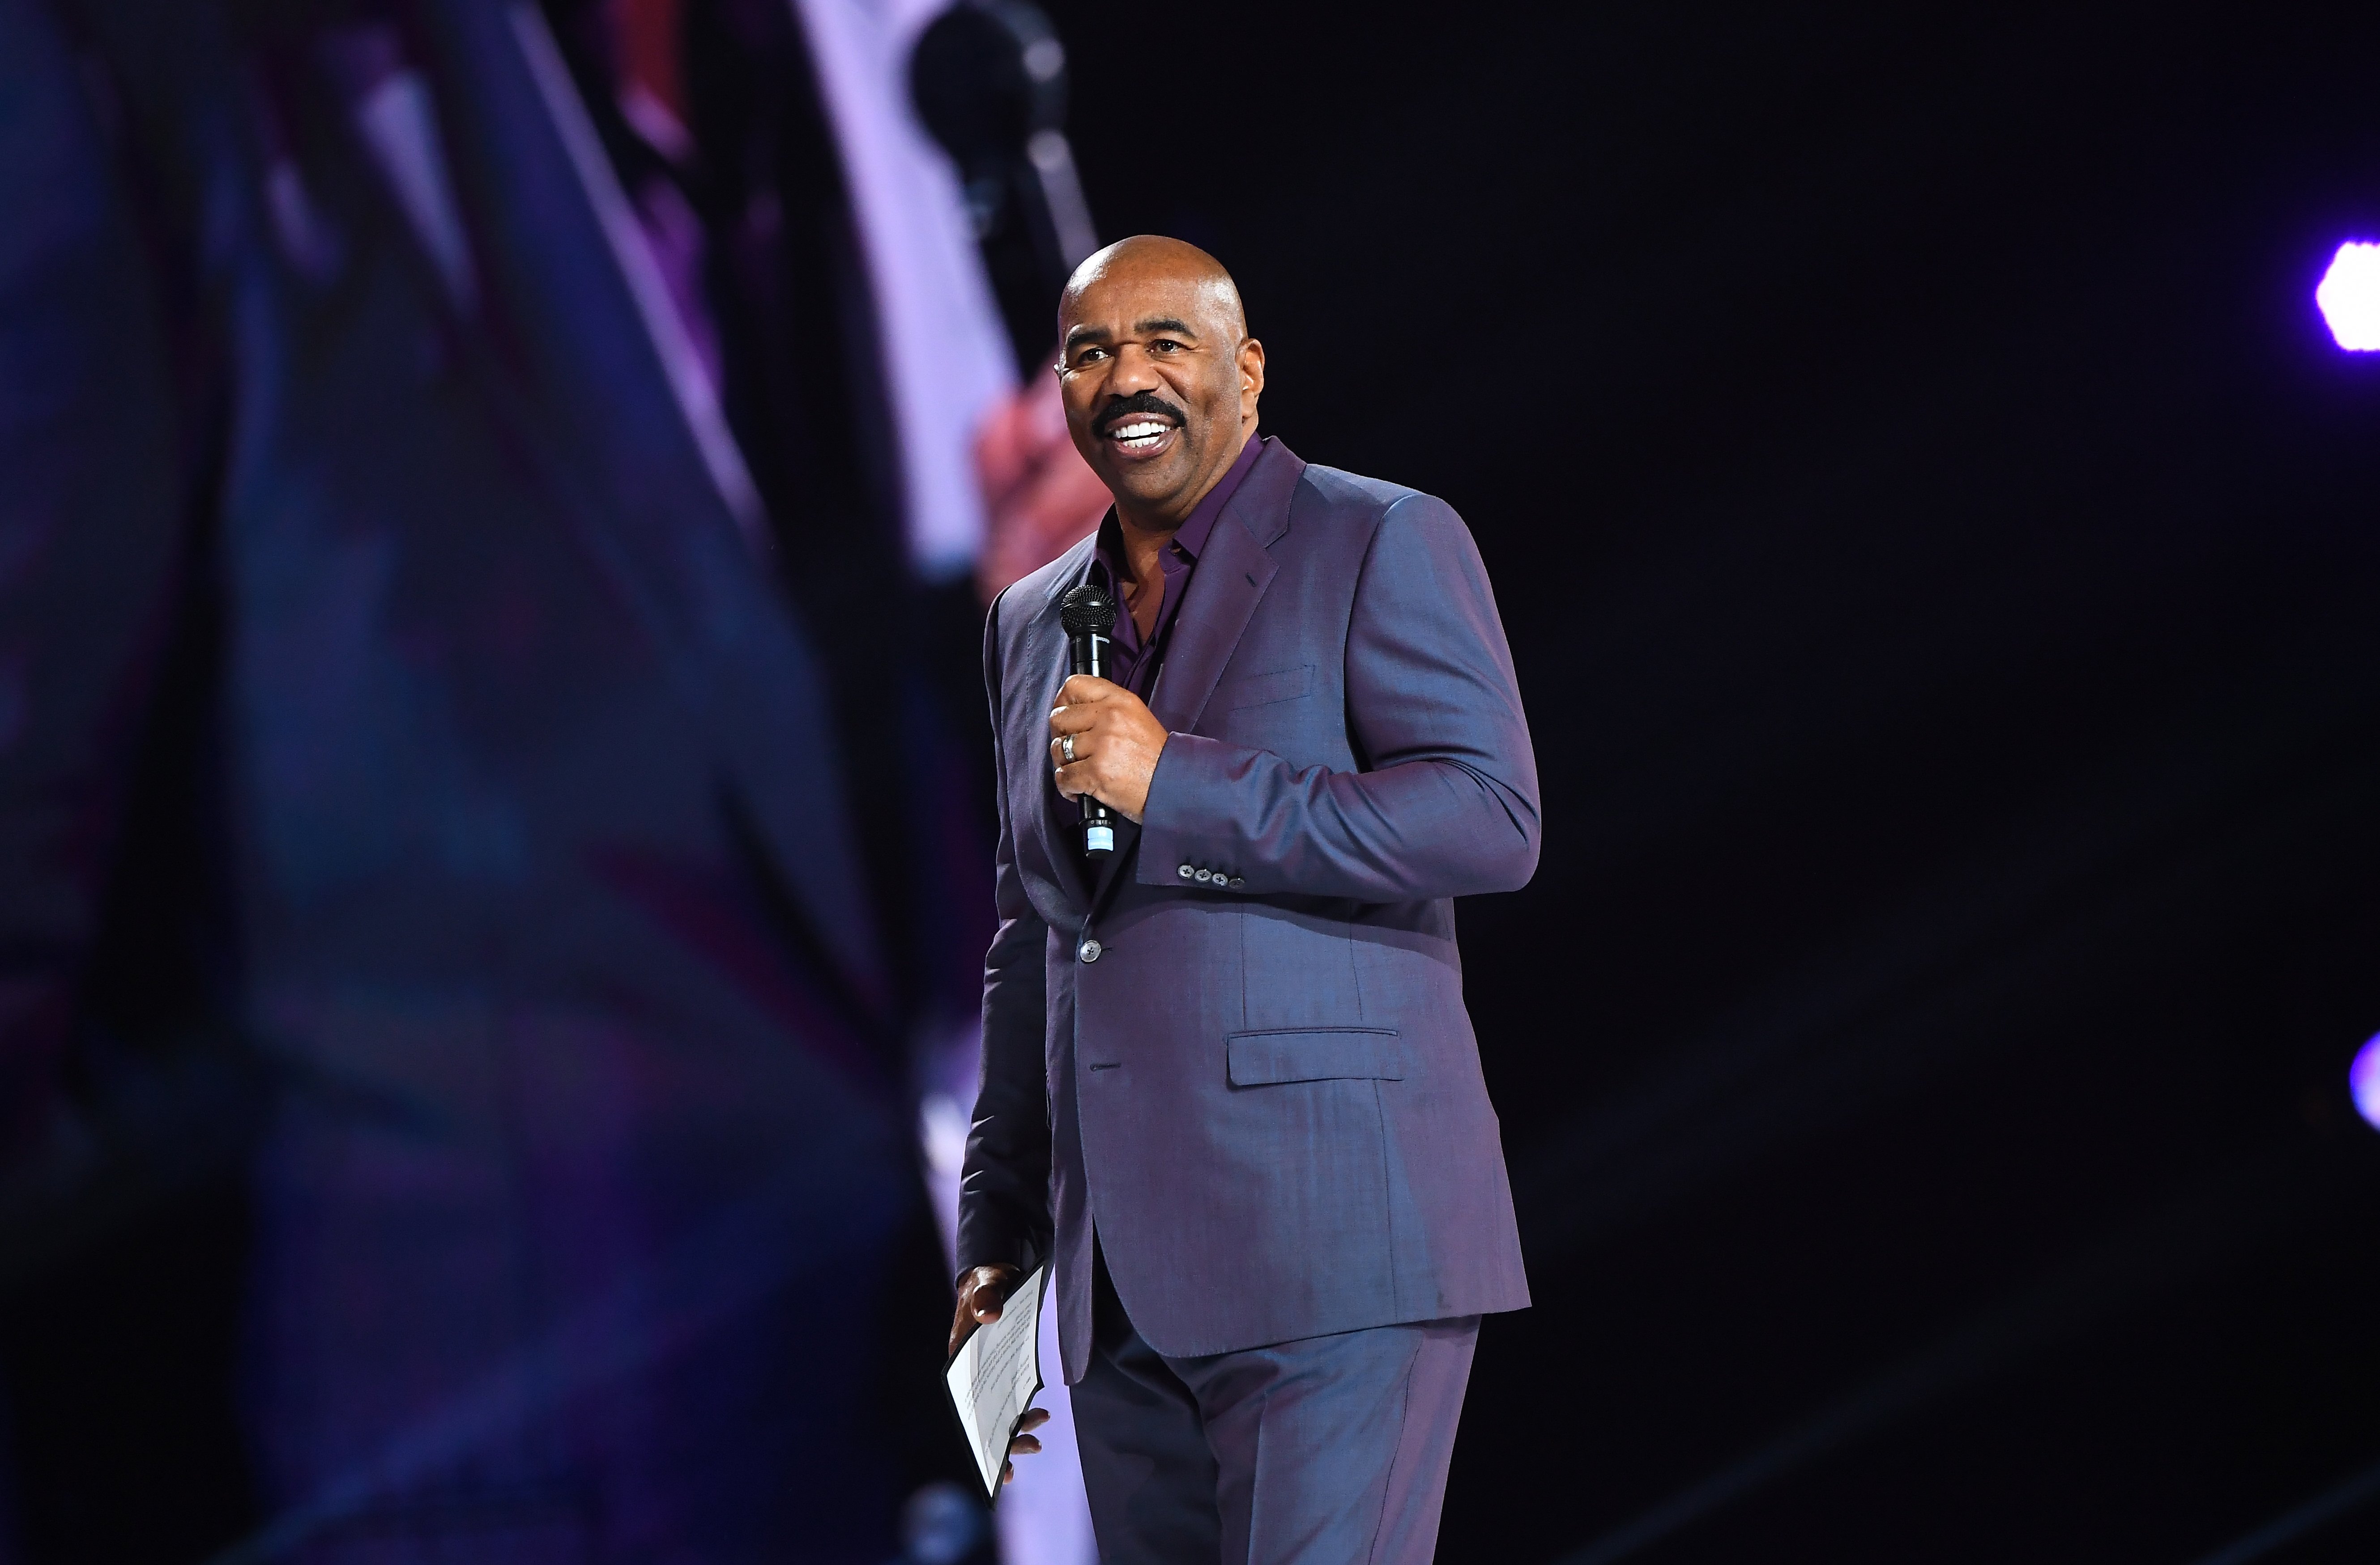 Steve Harvey onstage at the Beloved Benefit in Atlanta, Georgia on March 21, 2019 | Photo: Getty Images